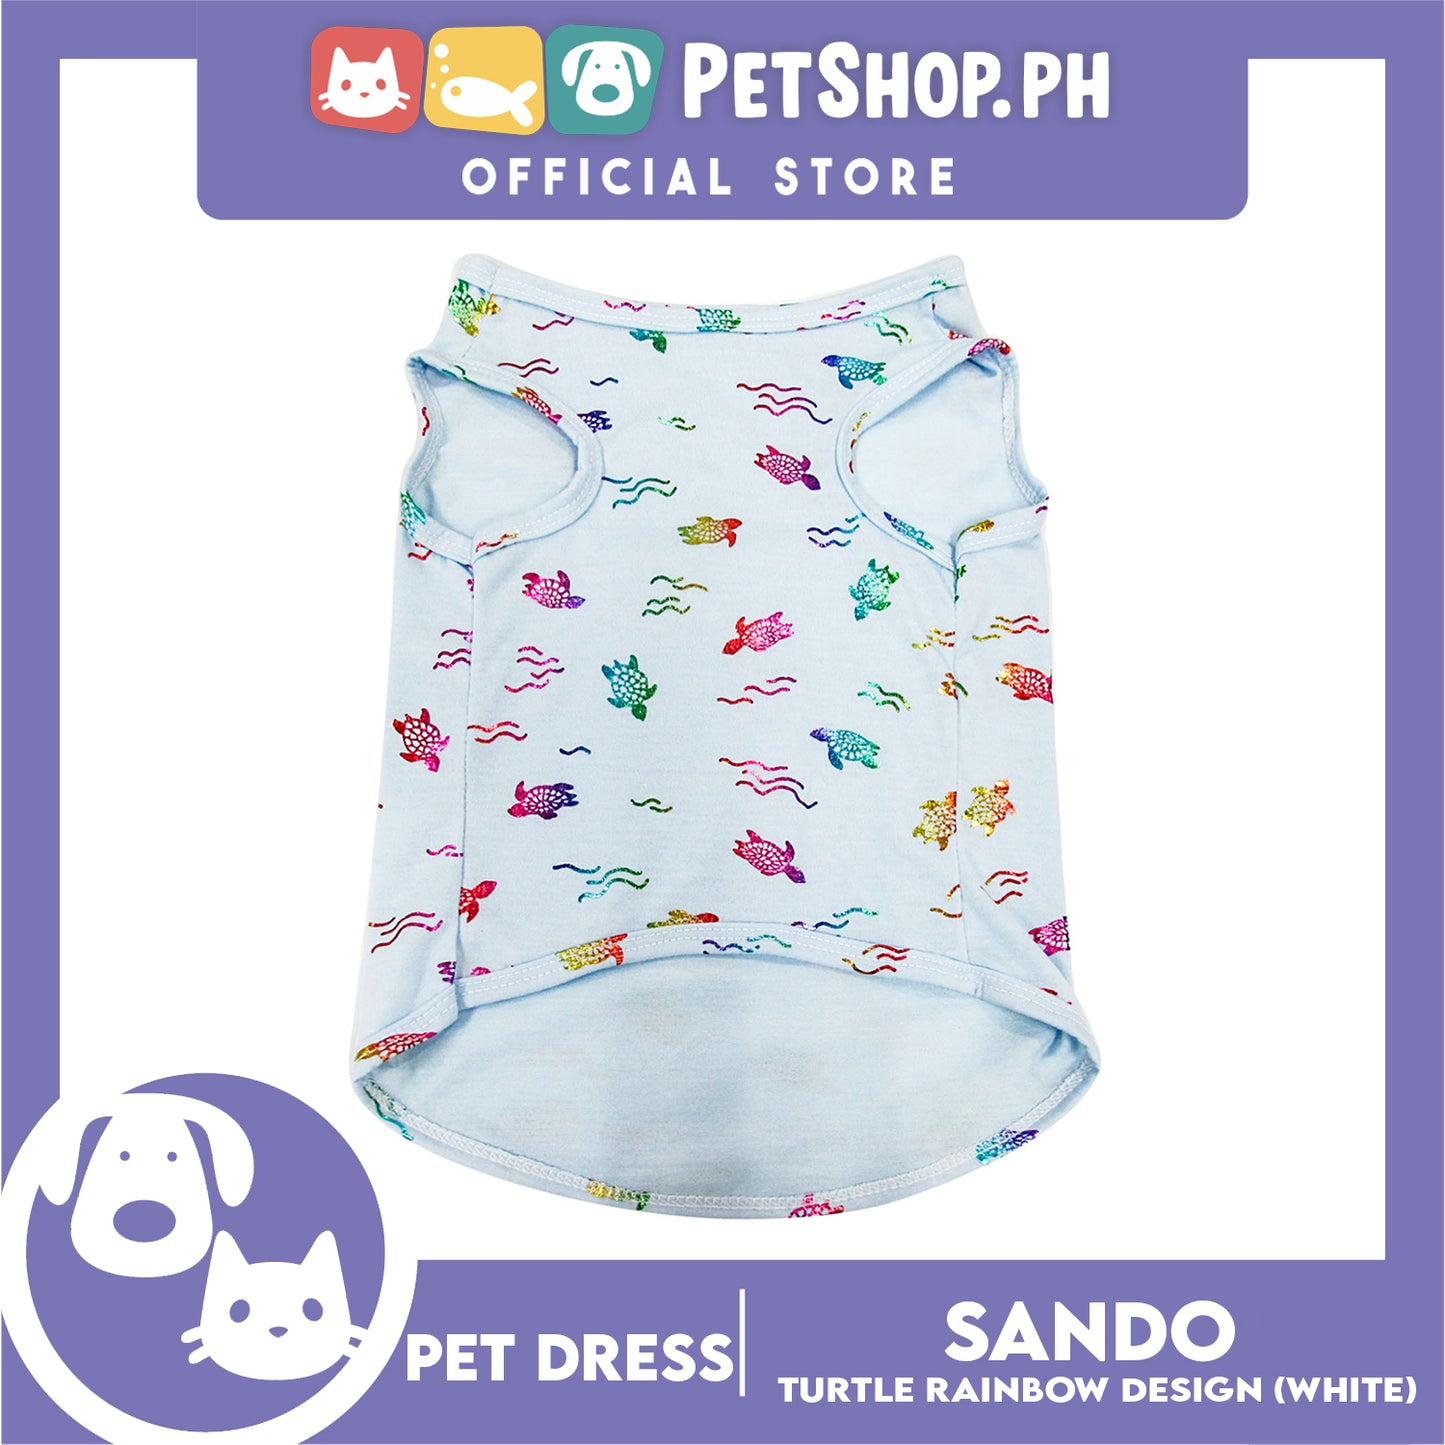 Pet Shirt Sea Turtle Silky Print Rainbow Sleeveless (Large Size) for Puppy, Small Dog and Cats- Sando Breathable Clothes, Pet T-shirt, Sweatshirt